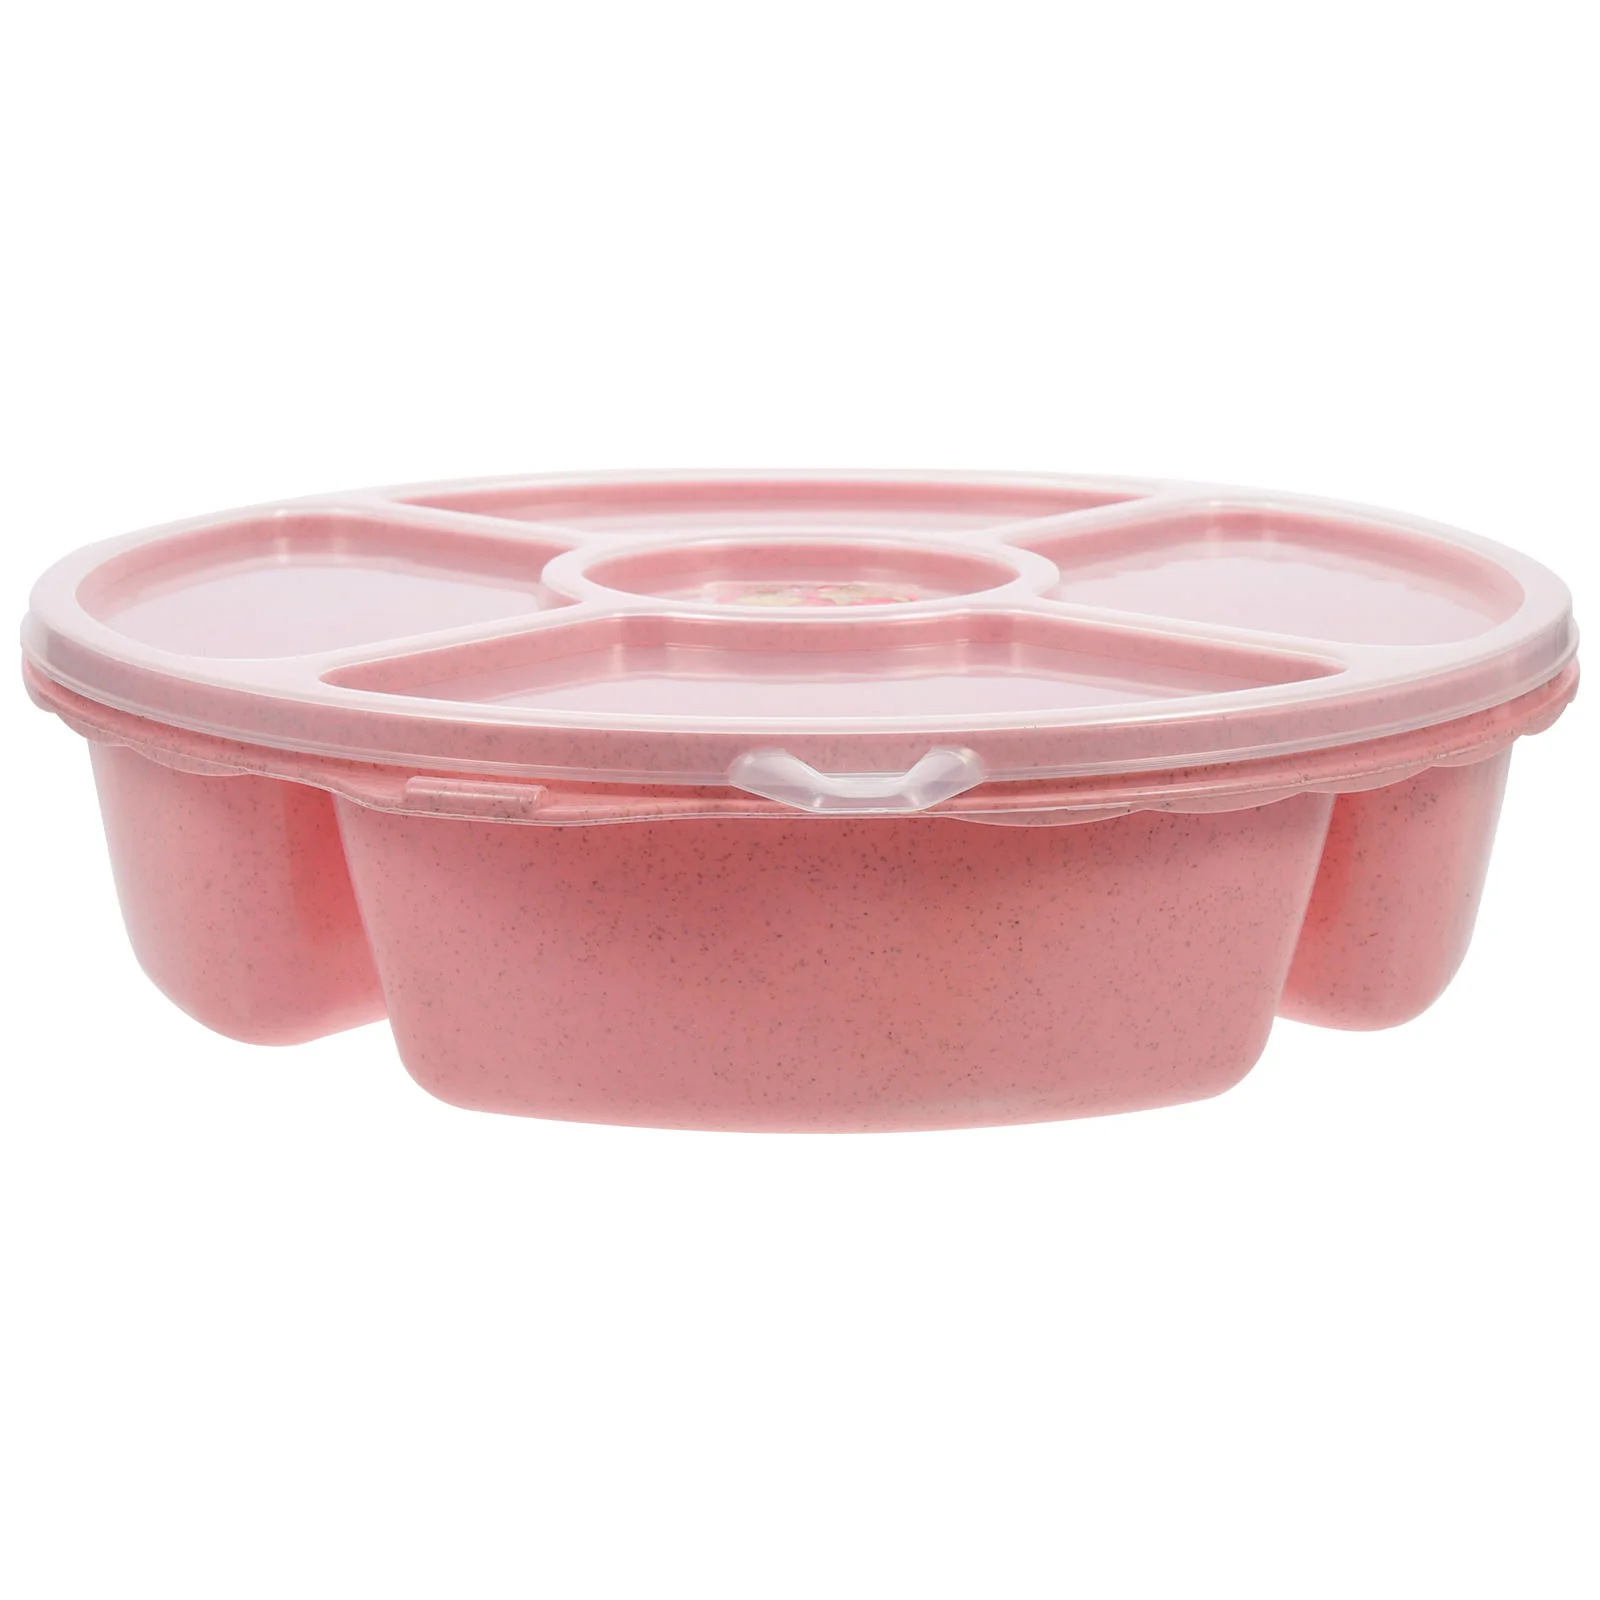 

Tray Serving Snack Fruit Divided Plate Box Appetizer Lid Candy Platter Compartment Storage Food Nut Dried Snacks Plastic Dish